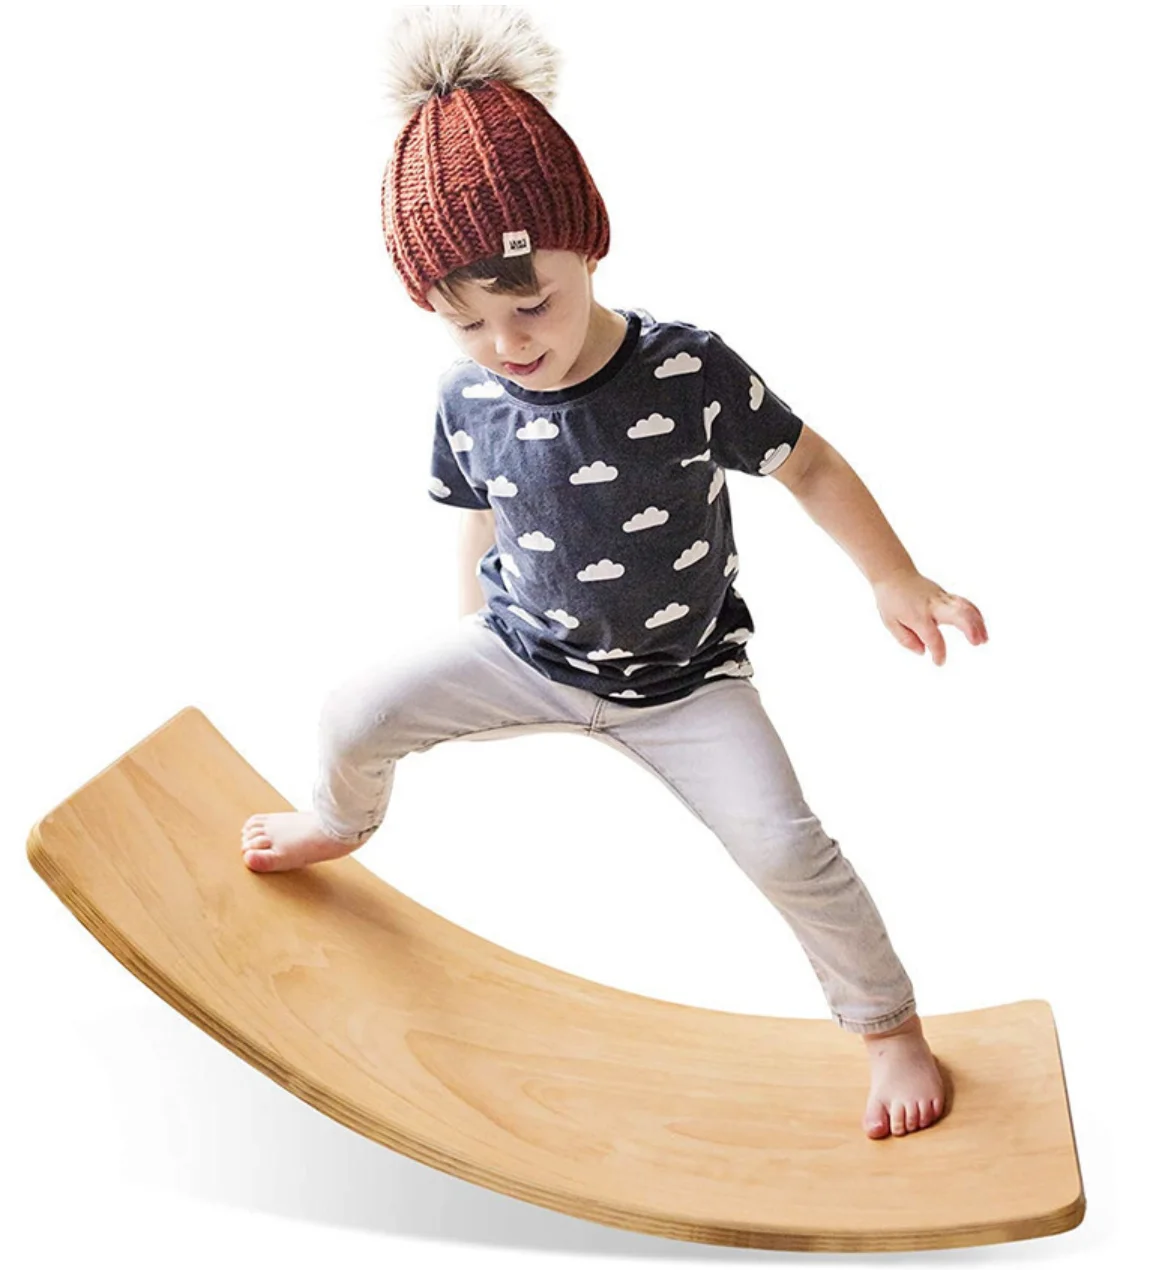 

Christmas gift promotion wooden balance board ECO friendly balancing toy wobble board game wood kids fitness gym balance board